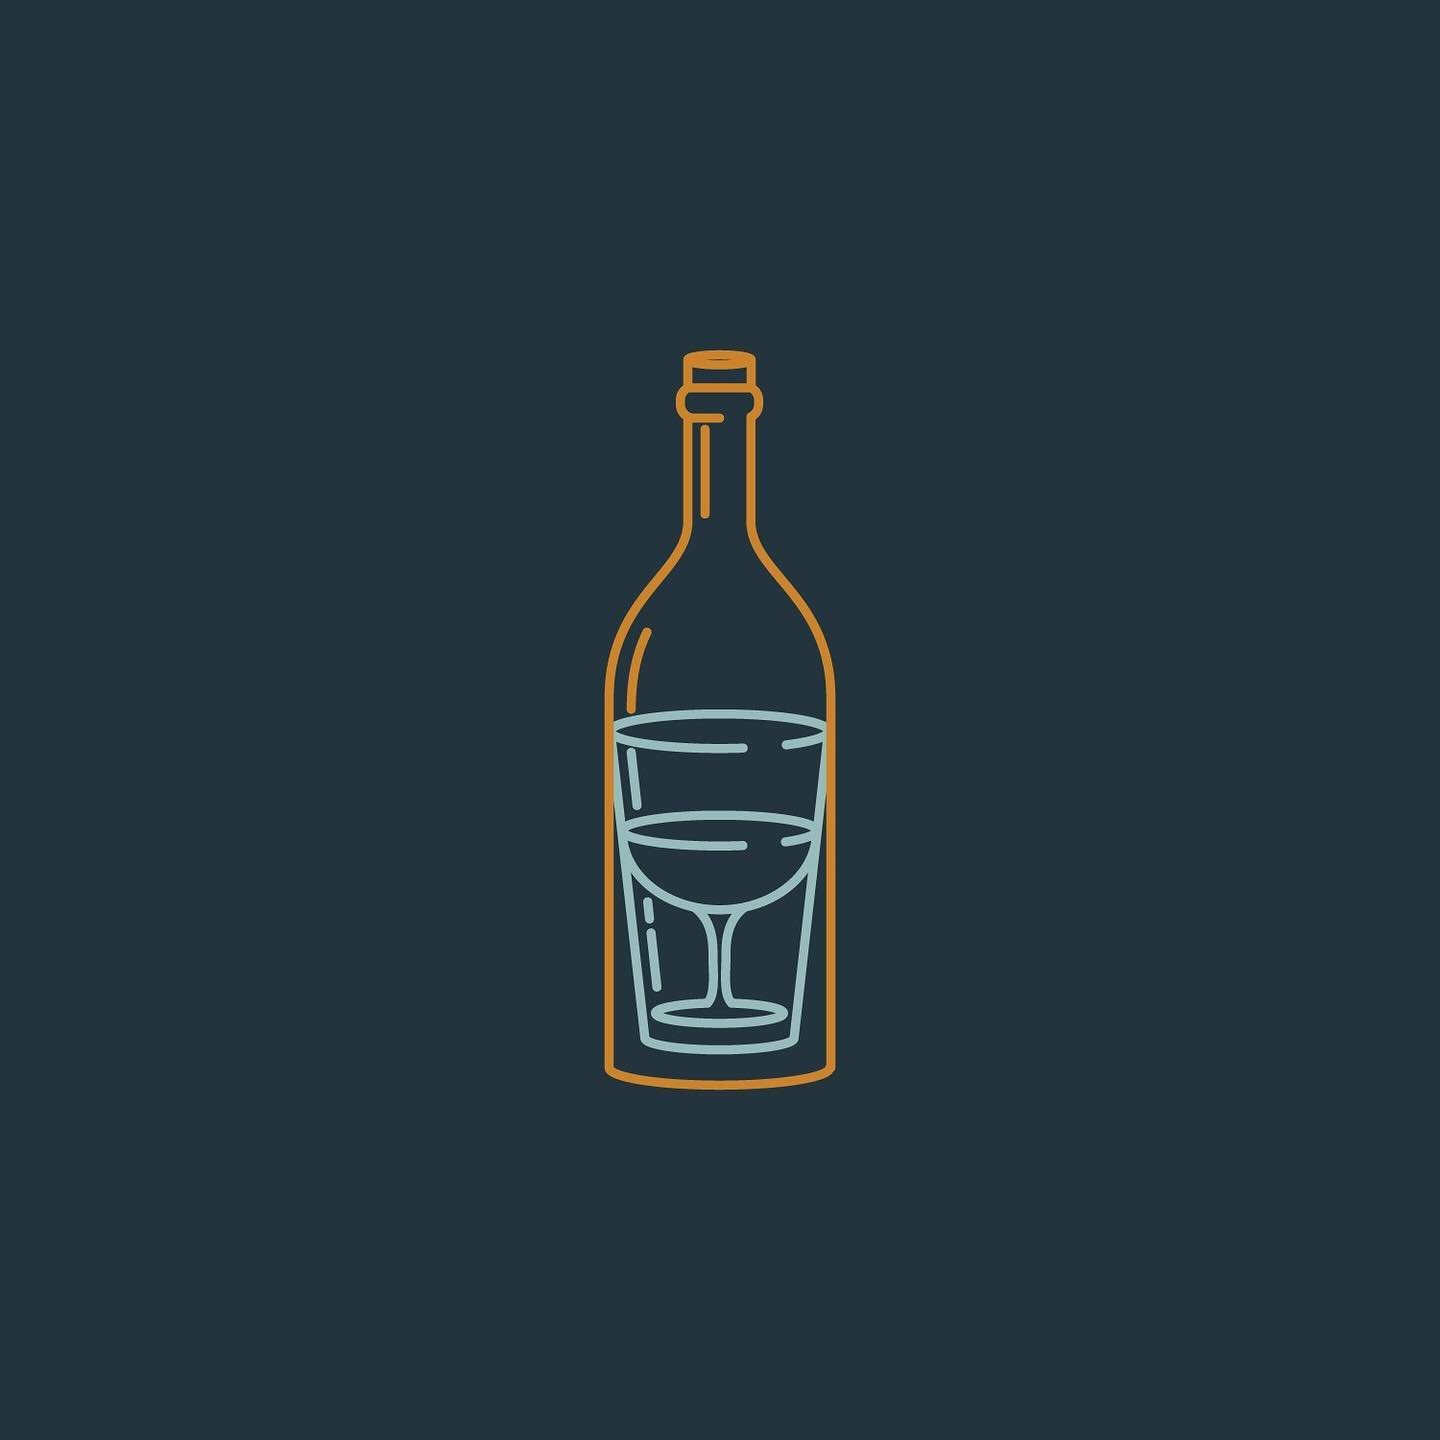 This is probably one of my favorite icons I&rsquo;ve ever designed for Buena Vida Wine &amp; Spirits. The bottle has 4 different types of glassware including a wine bottle, champagne glass, pint glass, and wine glass. Swipe to see all of them highlig